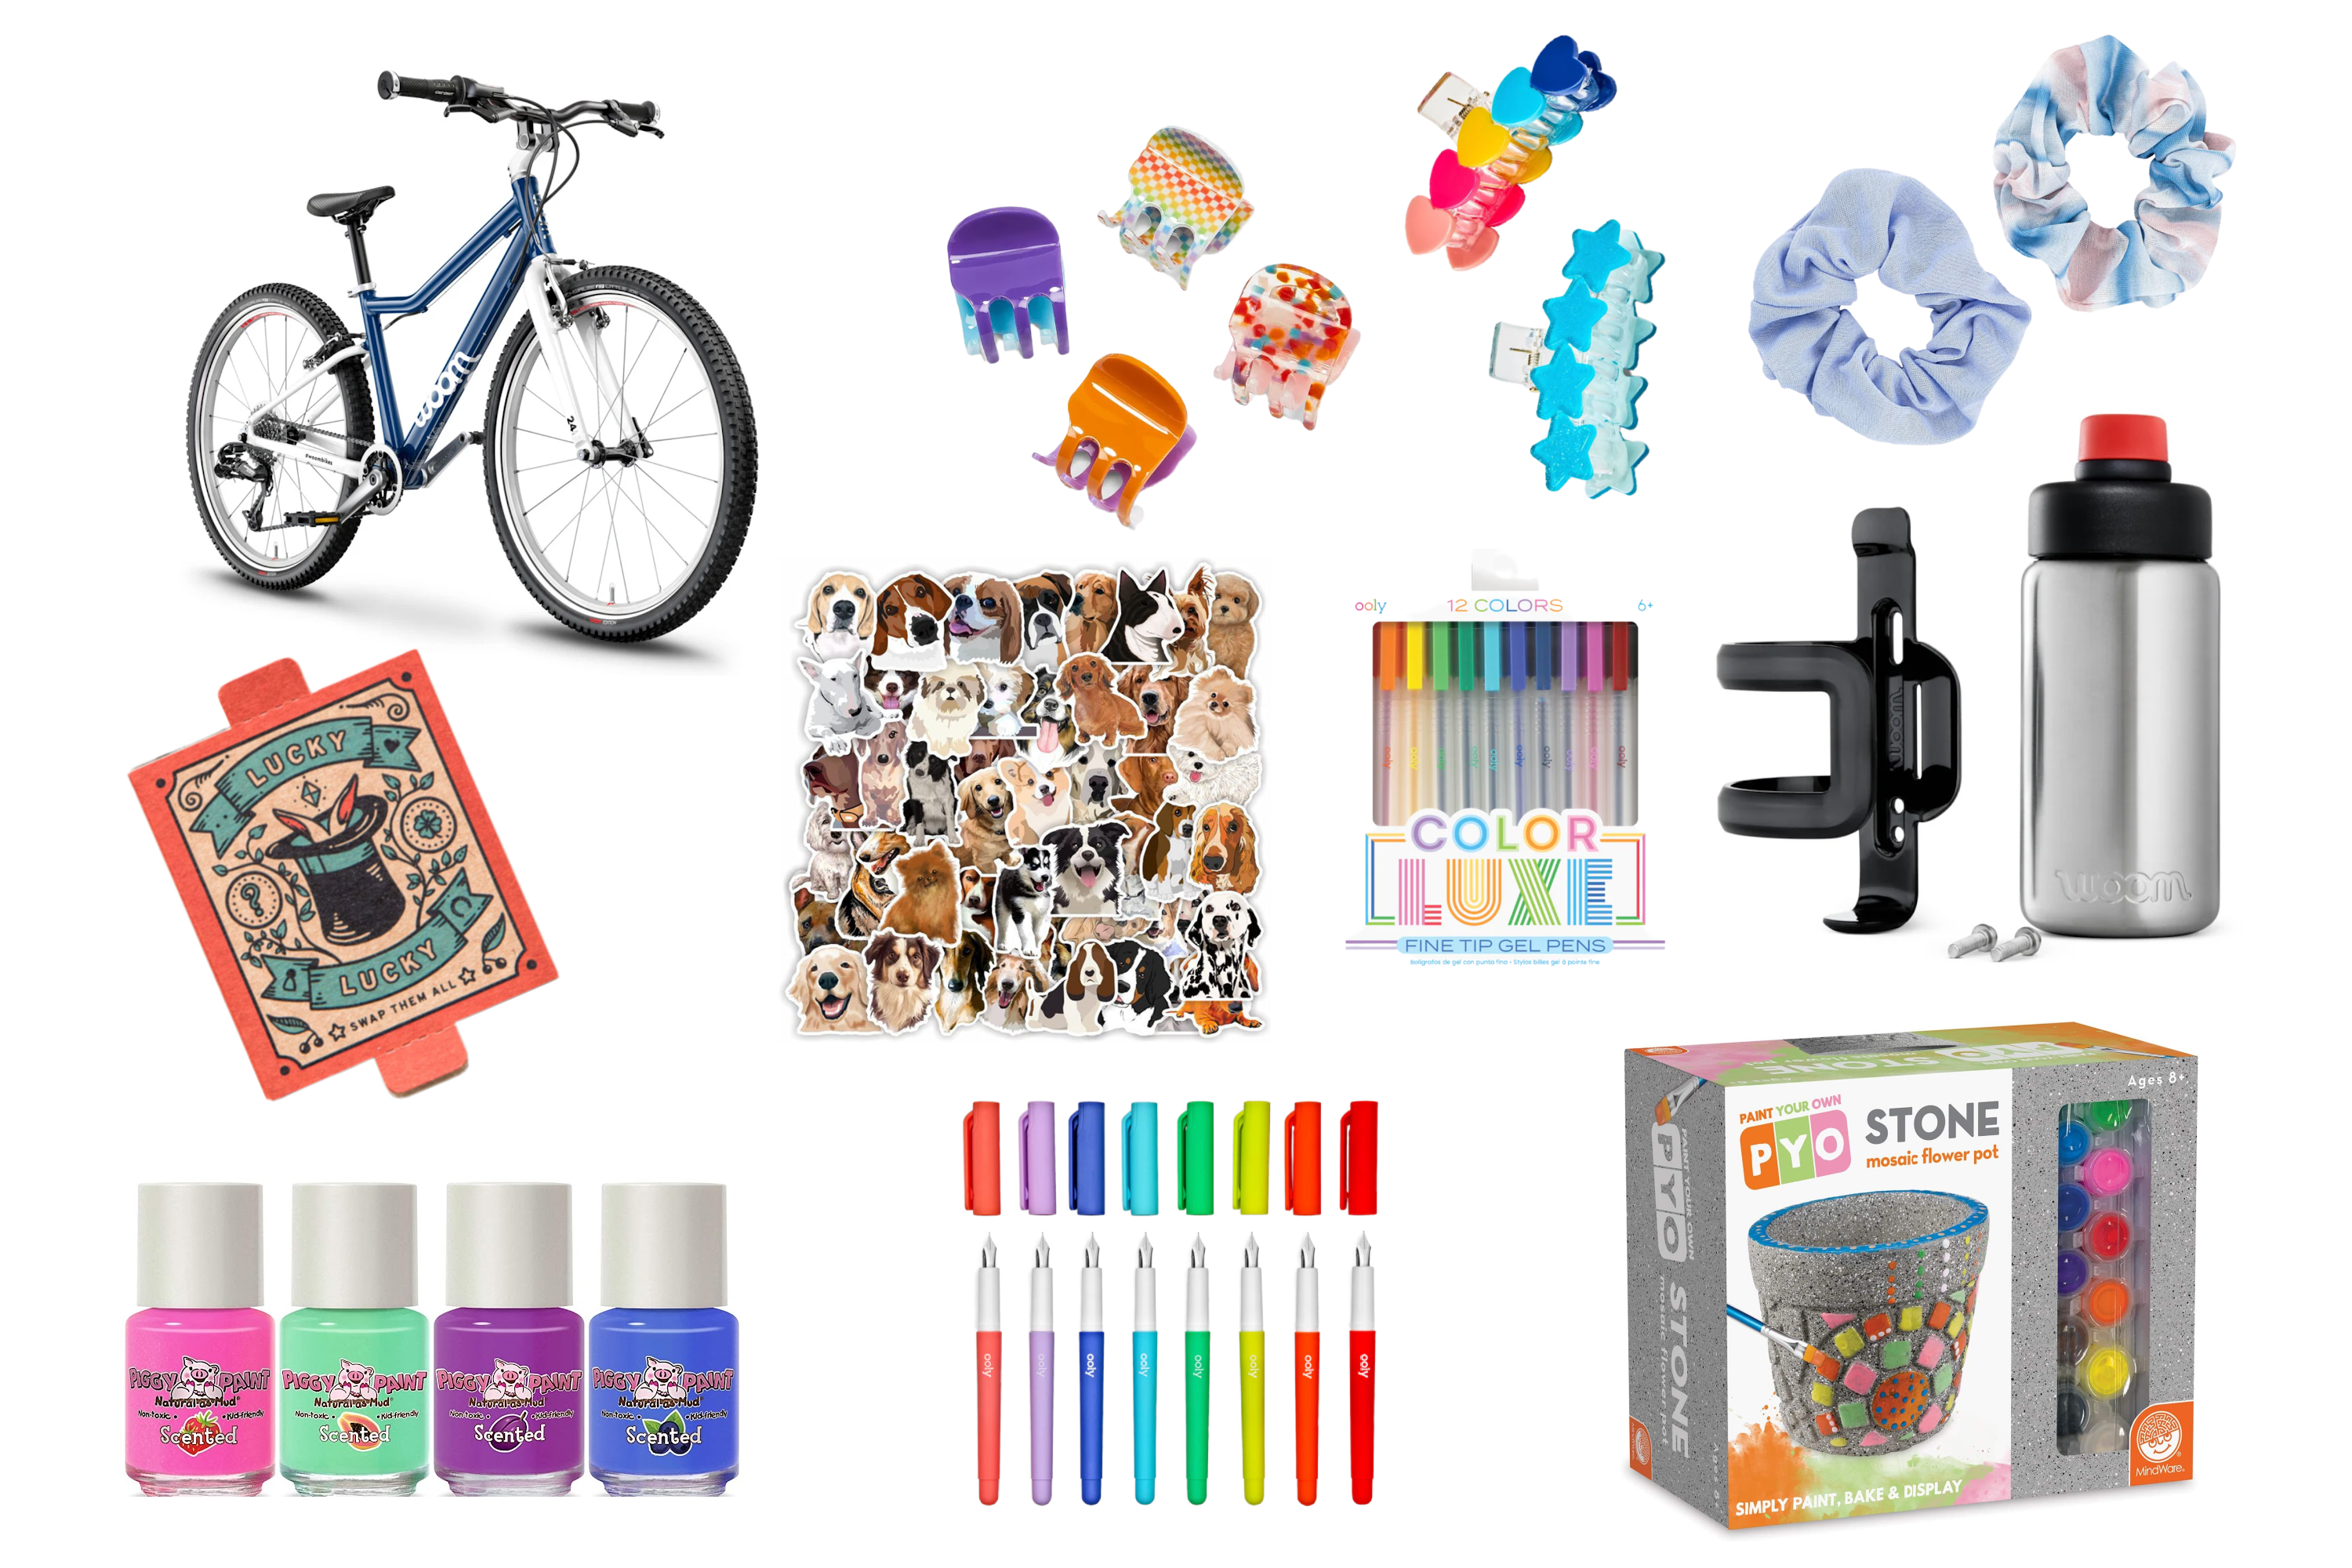 Montessori Friendly Birthday Gifts for 9-year-olds